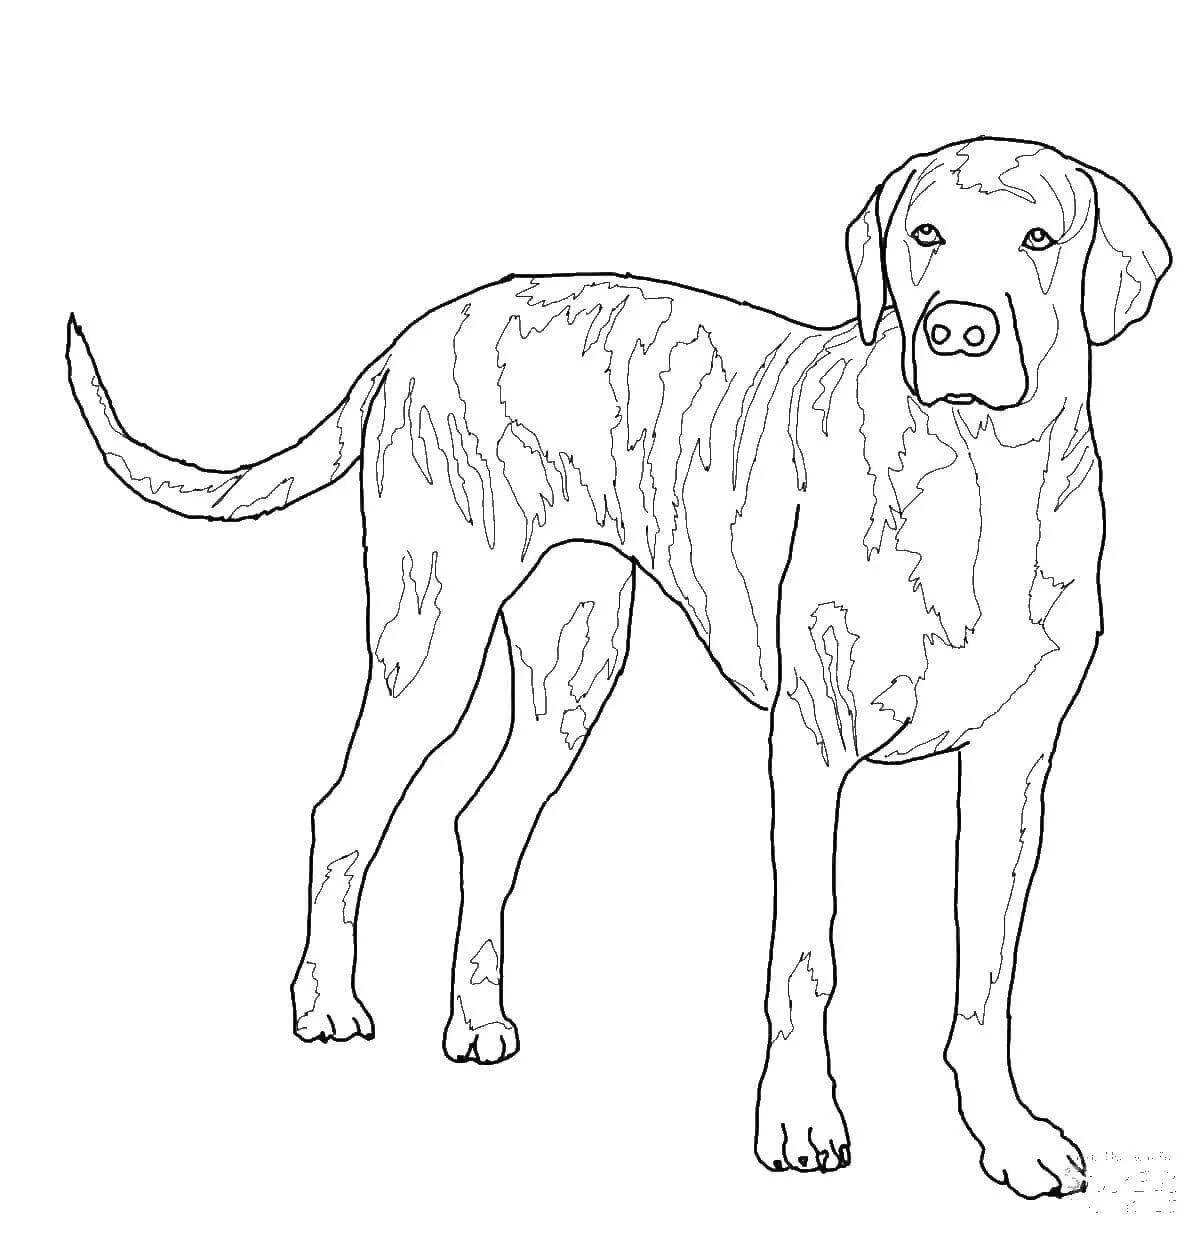 Alert about coloring dogs of different breeds